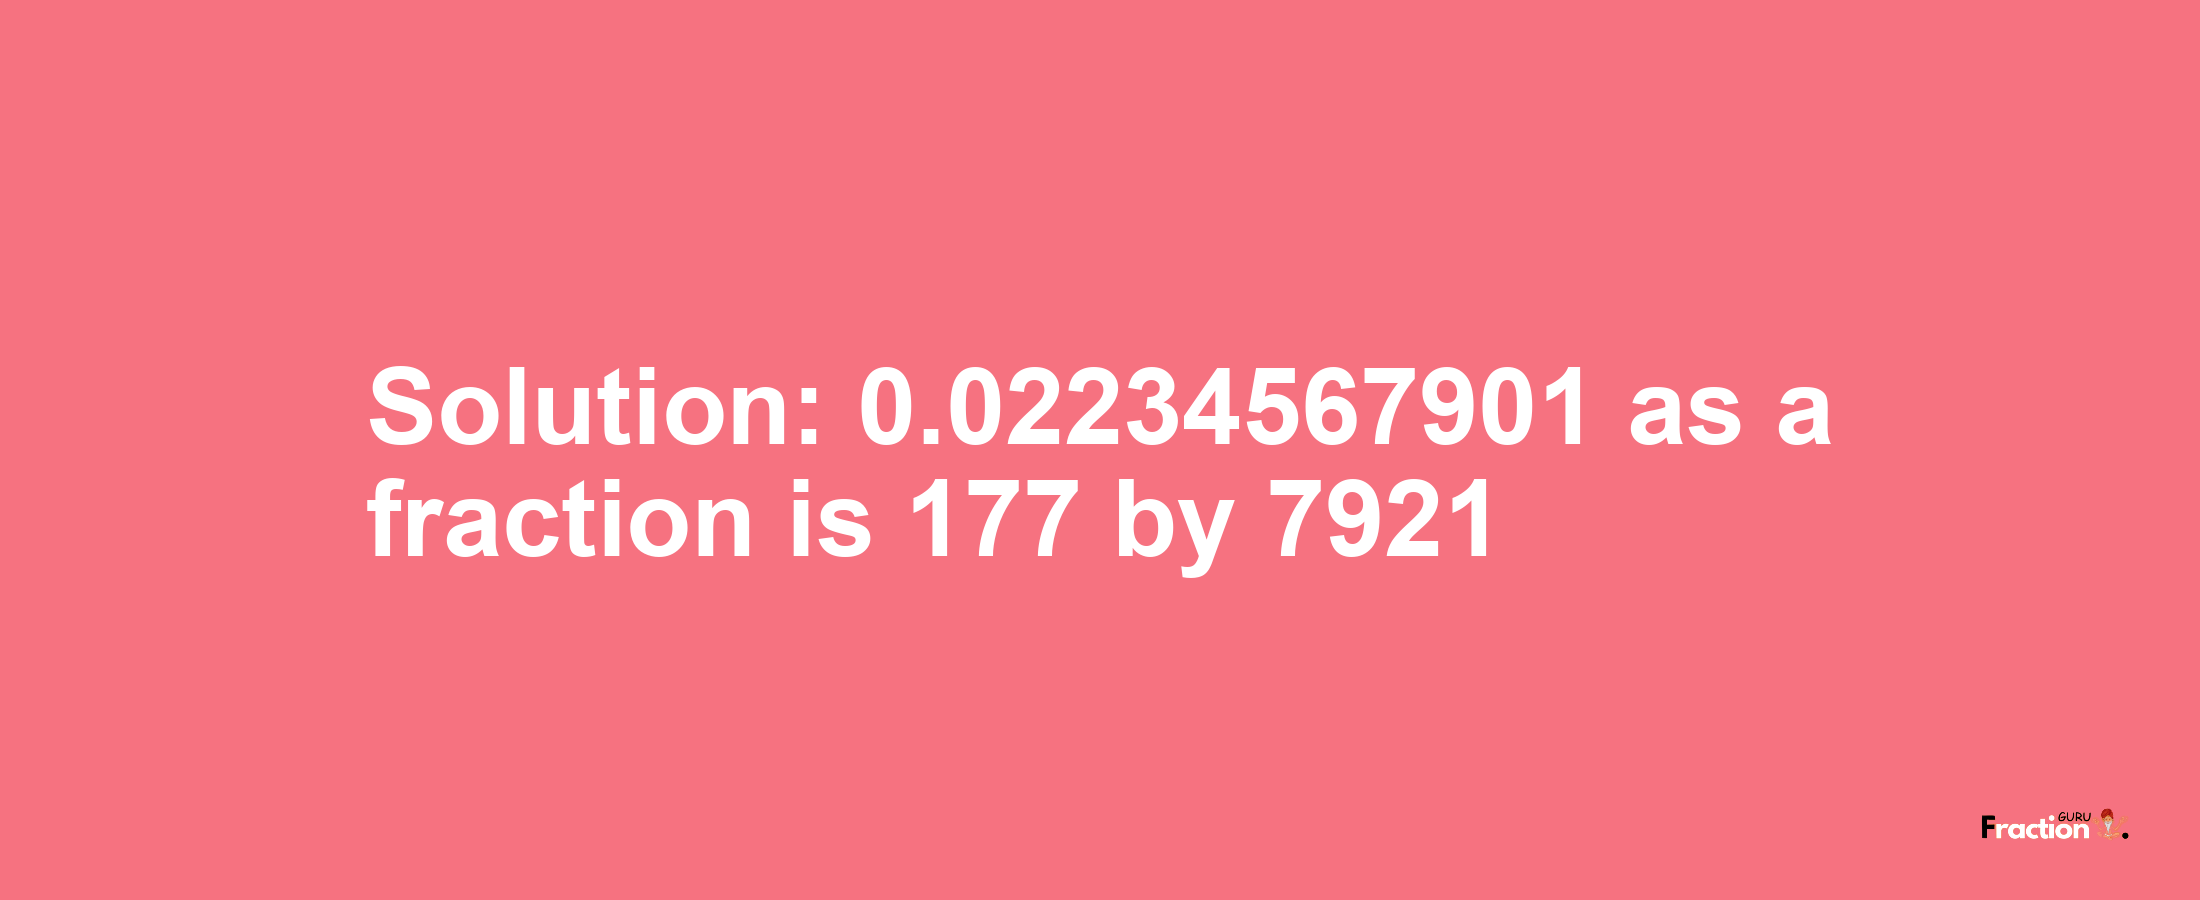 Solution:0.02234567901 as a fraction is 177/7921